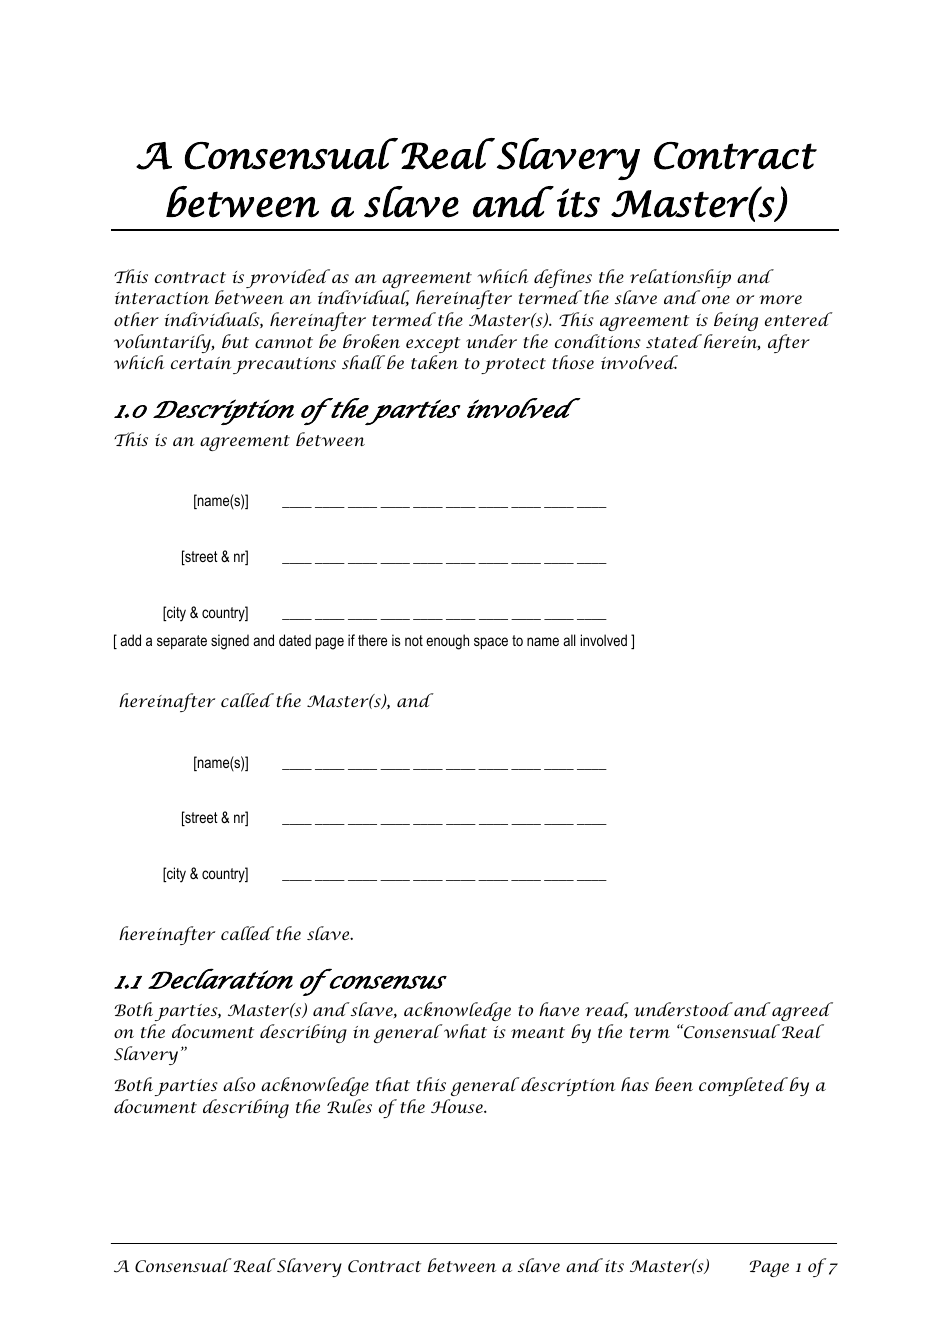 Master Slave Consensual Real Slavery Contract Template, Page 1